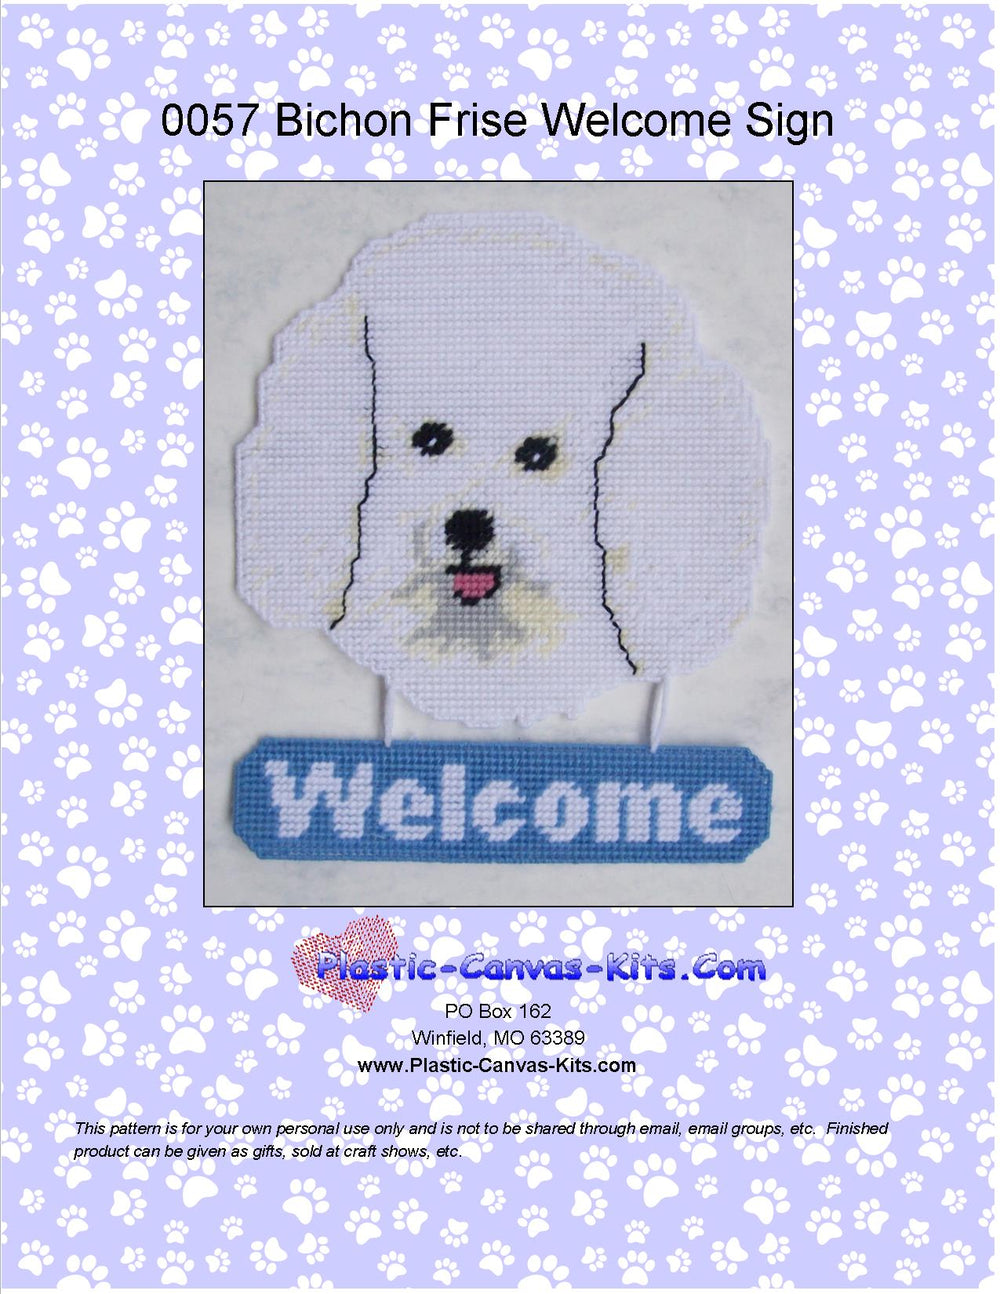 Bichon Frise Welcome Sign